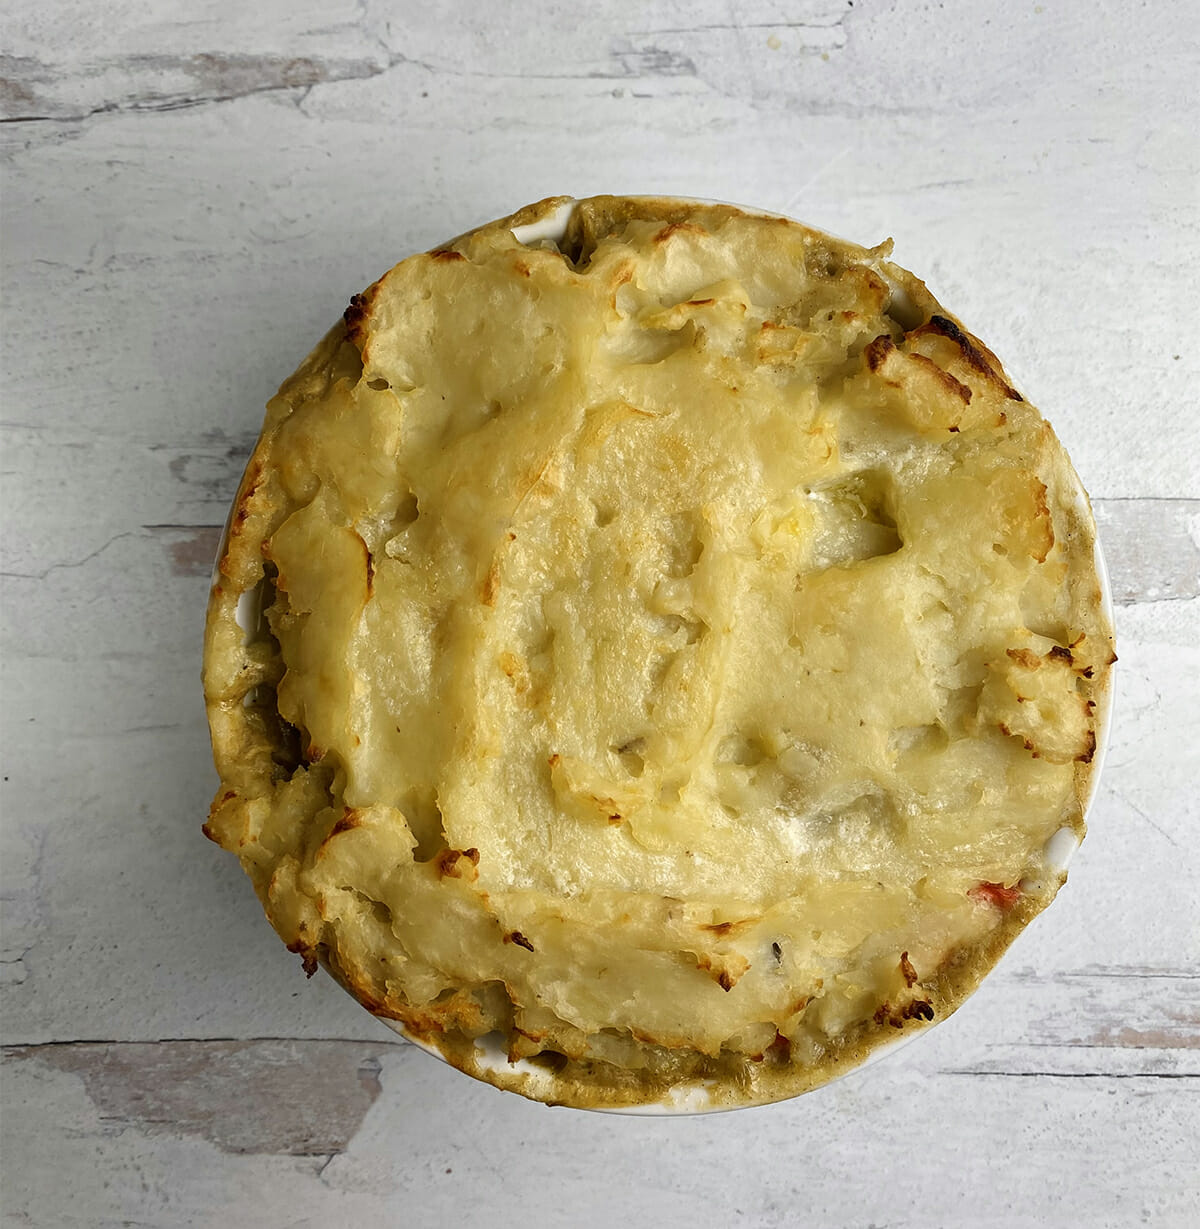 Baked chicken pot pie with a mashed potato crust on a wooden counter.